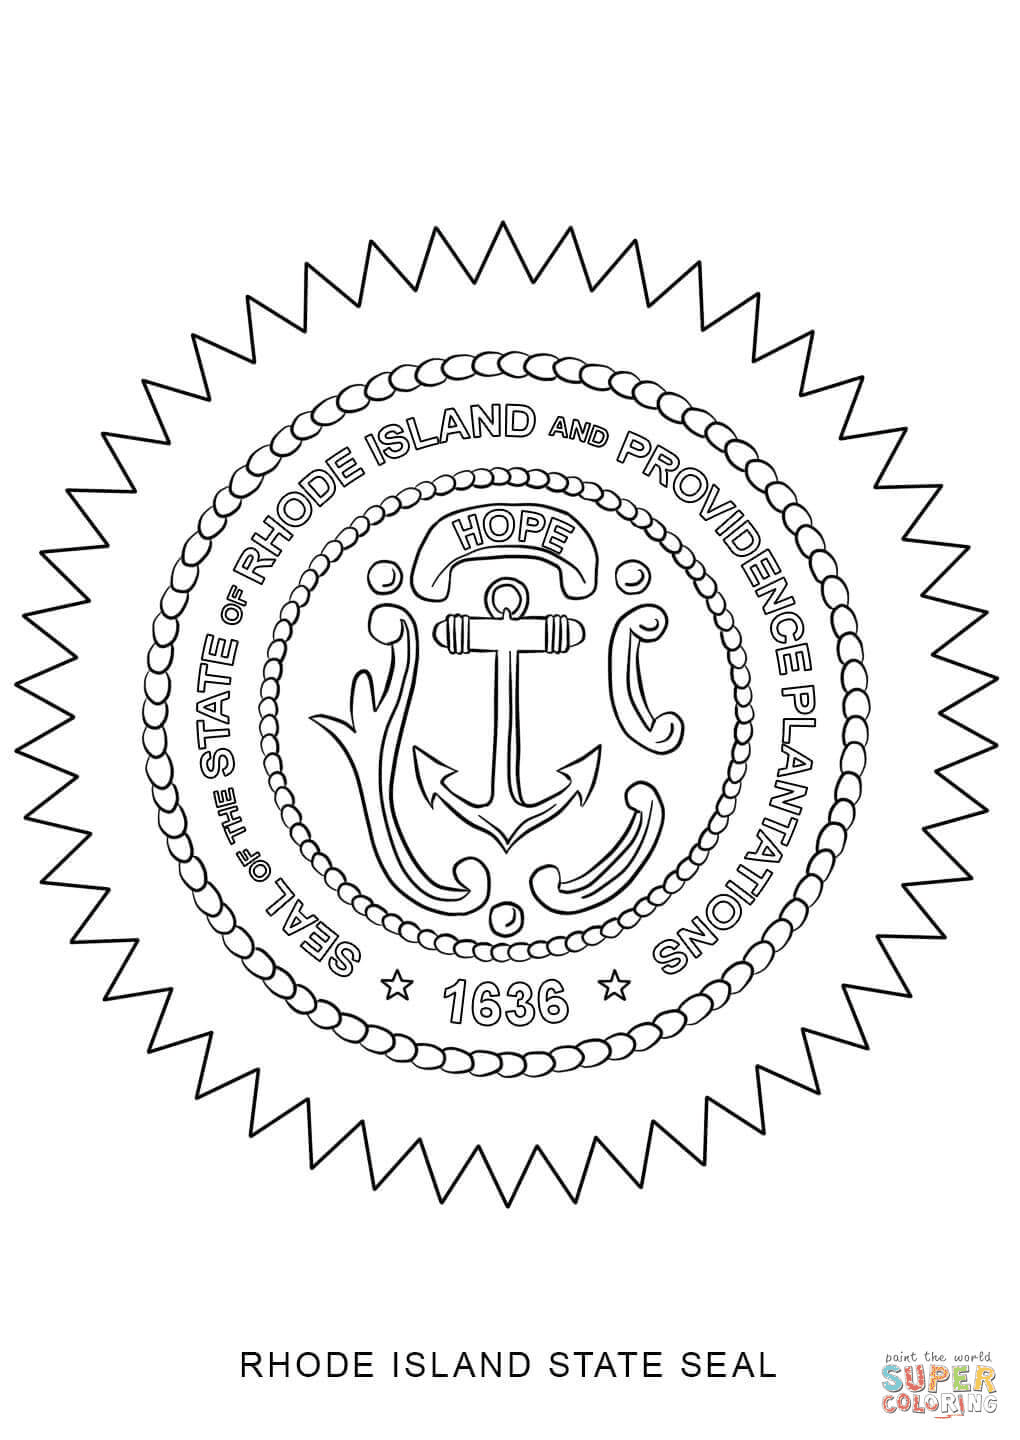 Rhode Island State Seal Coloring Page